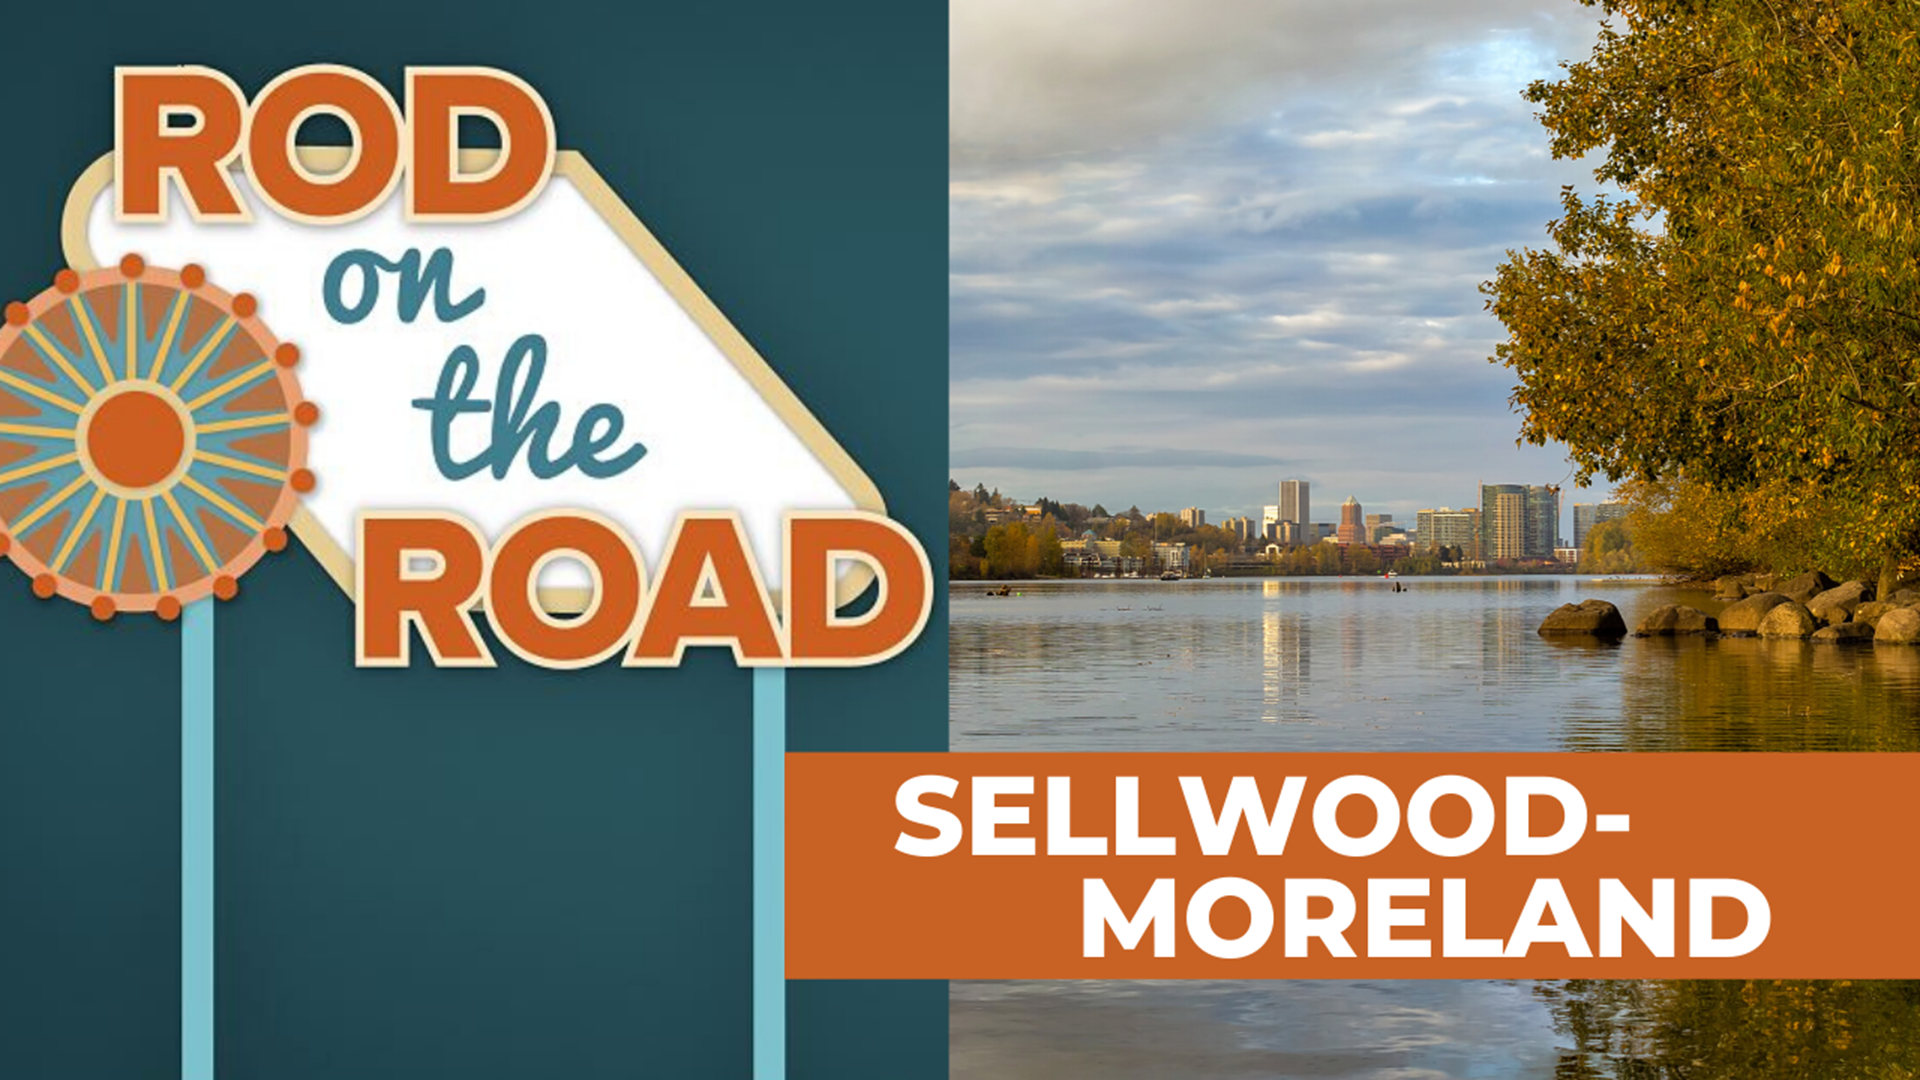 It's one of the most historic, picturesque neighborhoods in SE Portland. Meteorologist Rod Hill visits Sellwood-Moreland and meets the people that call it home.